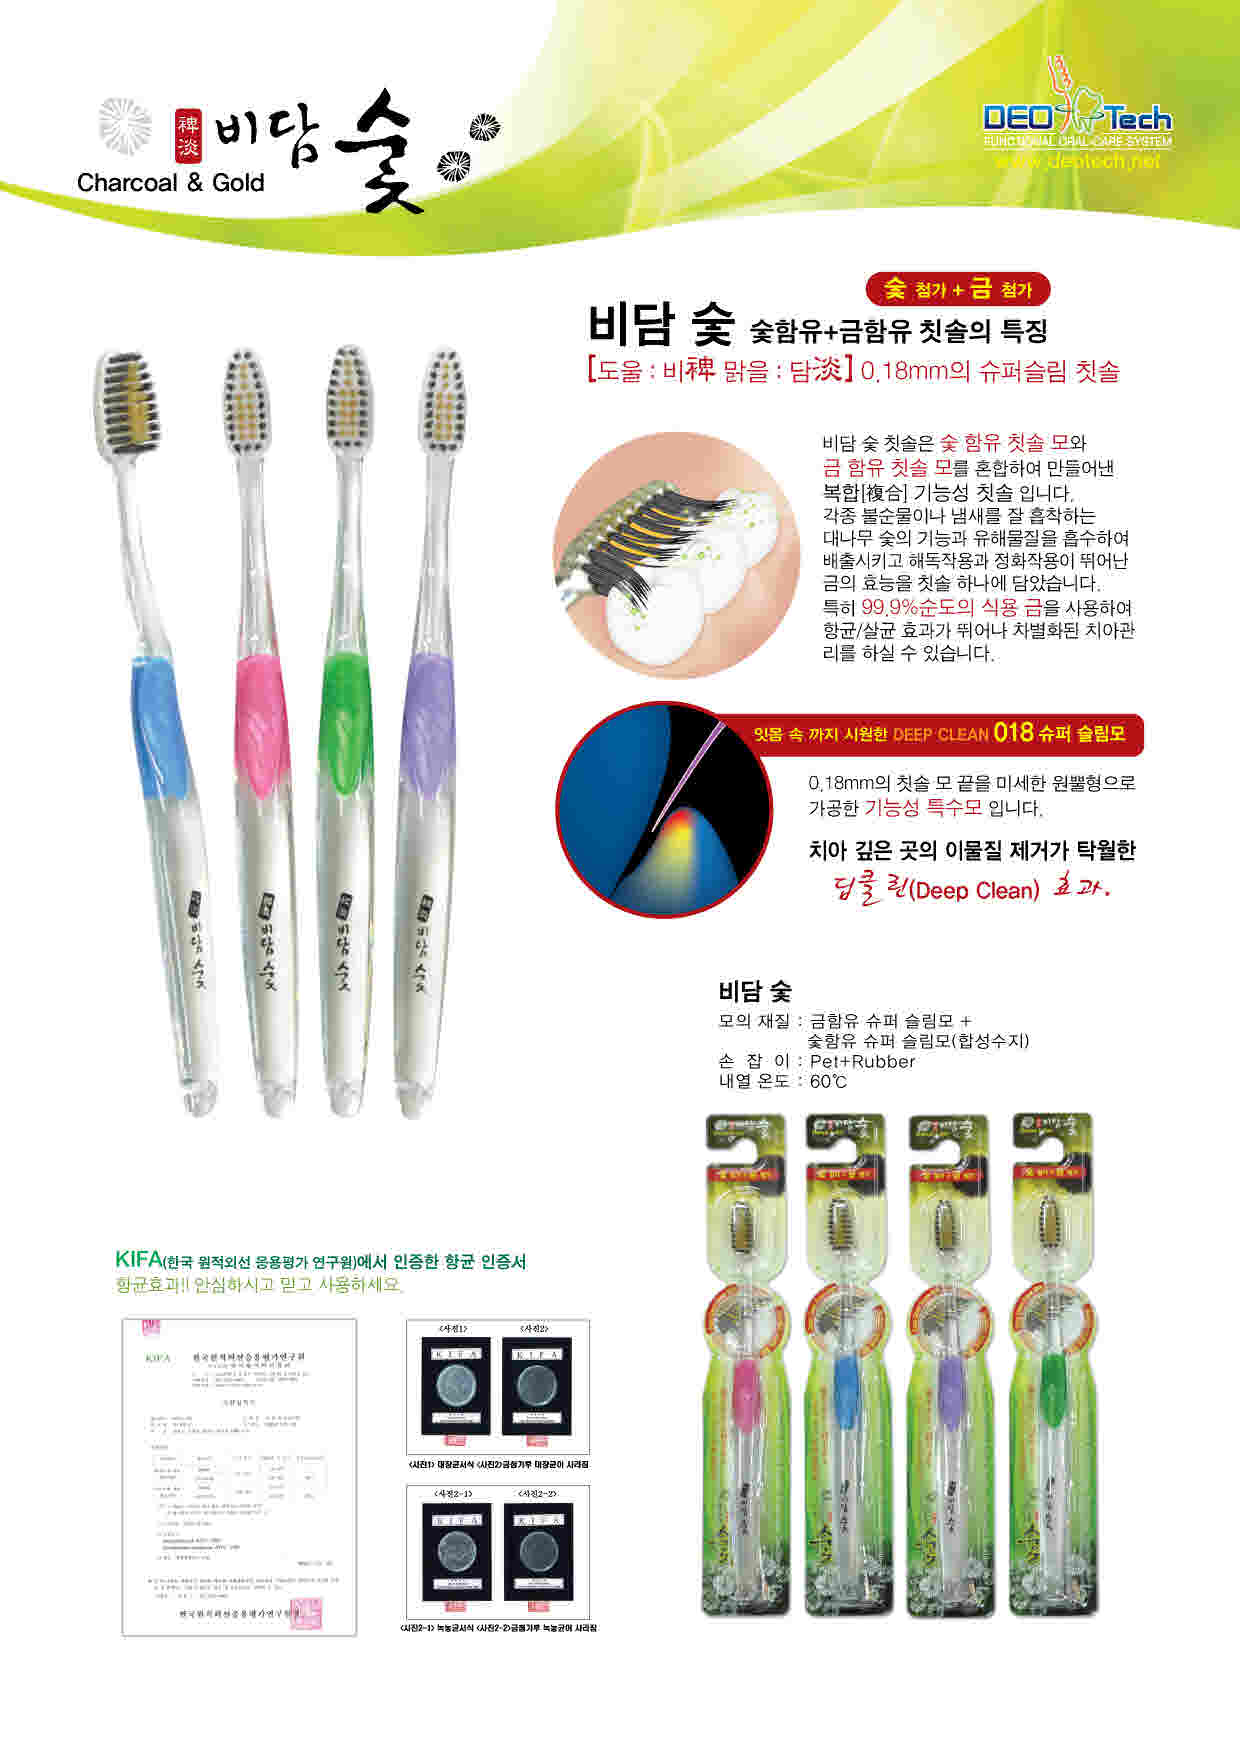 Toothbrush/Charcoal & Gold Made in Korea